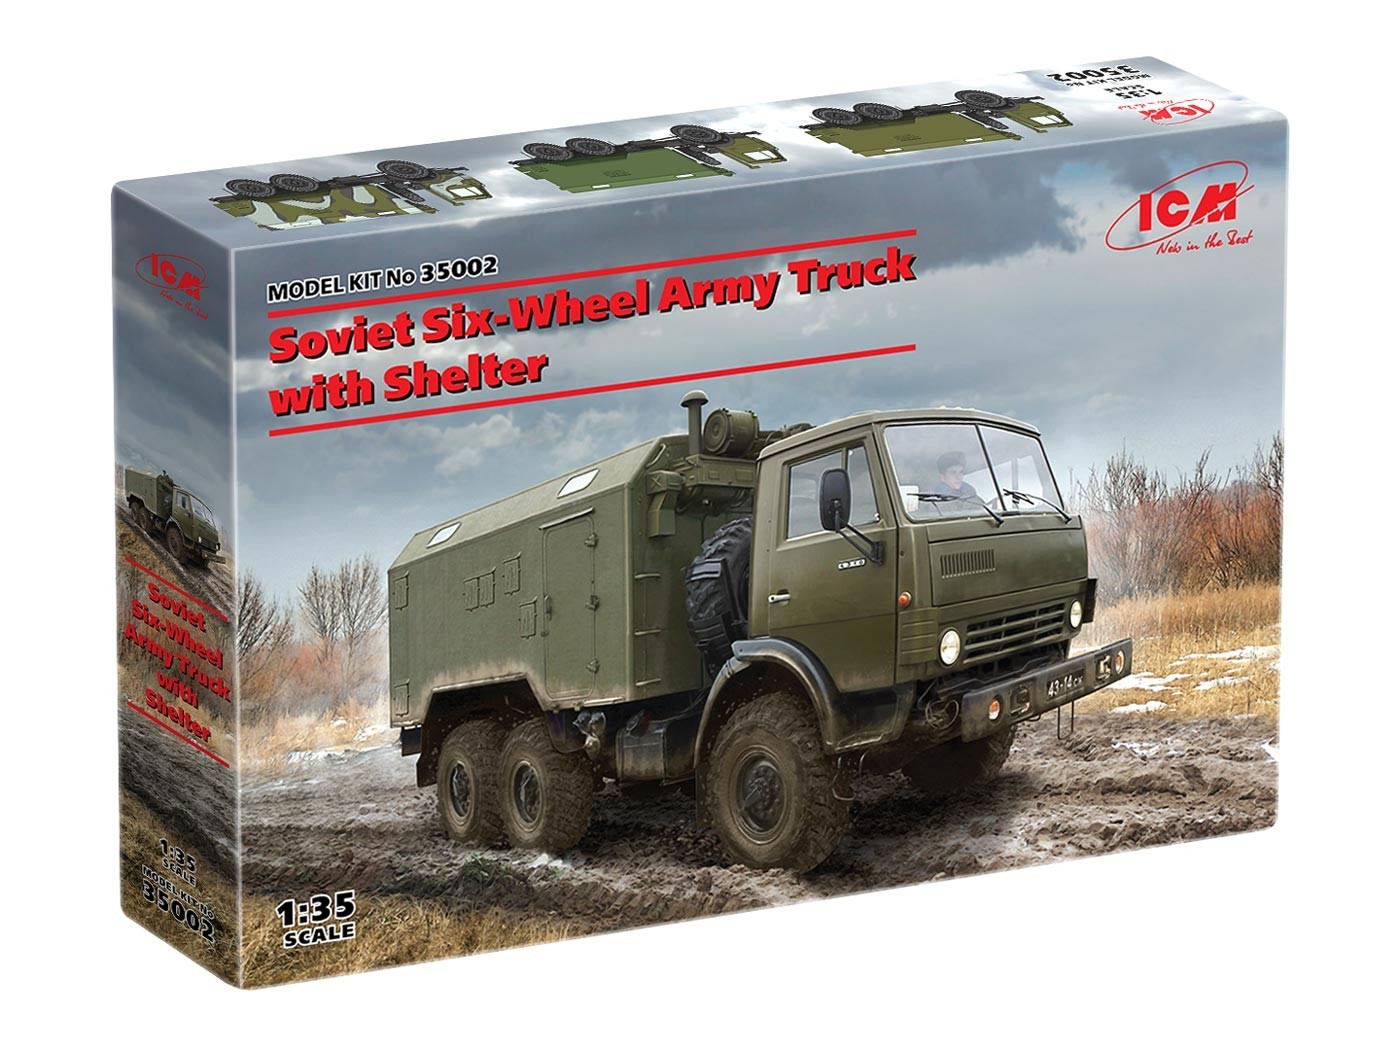 Soviet Six-Wheel Army Truck with Shelter